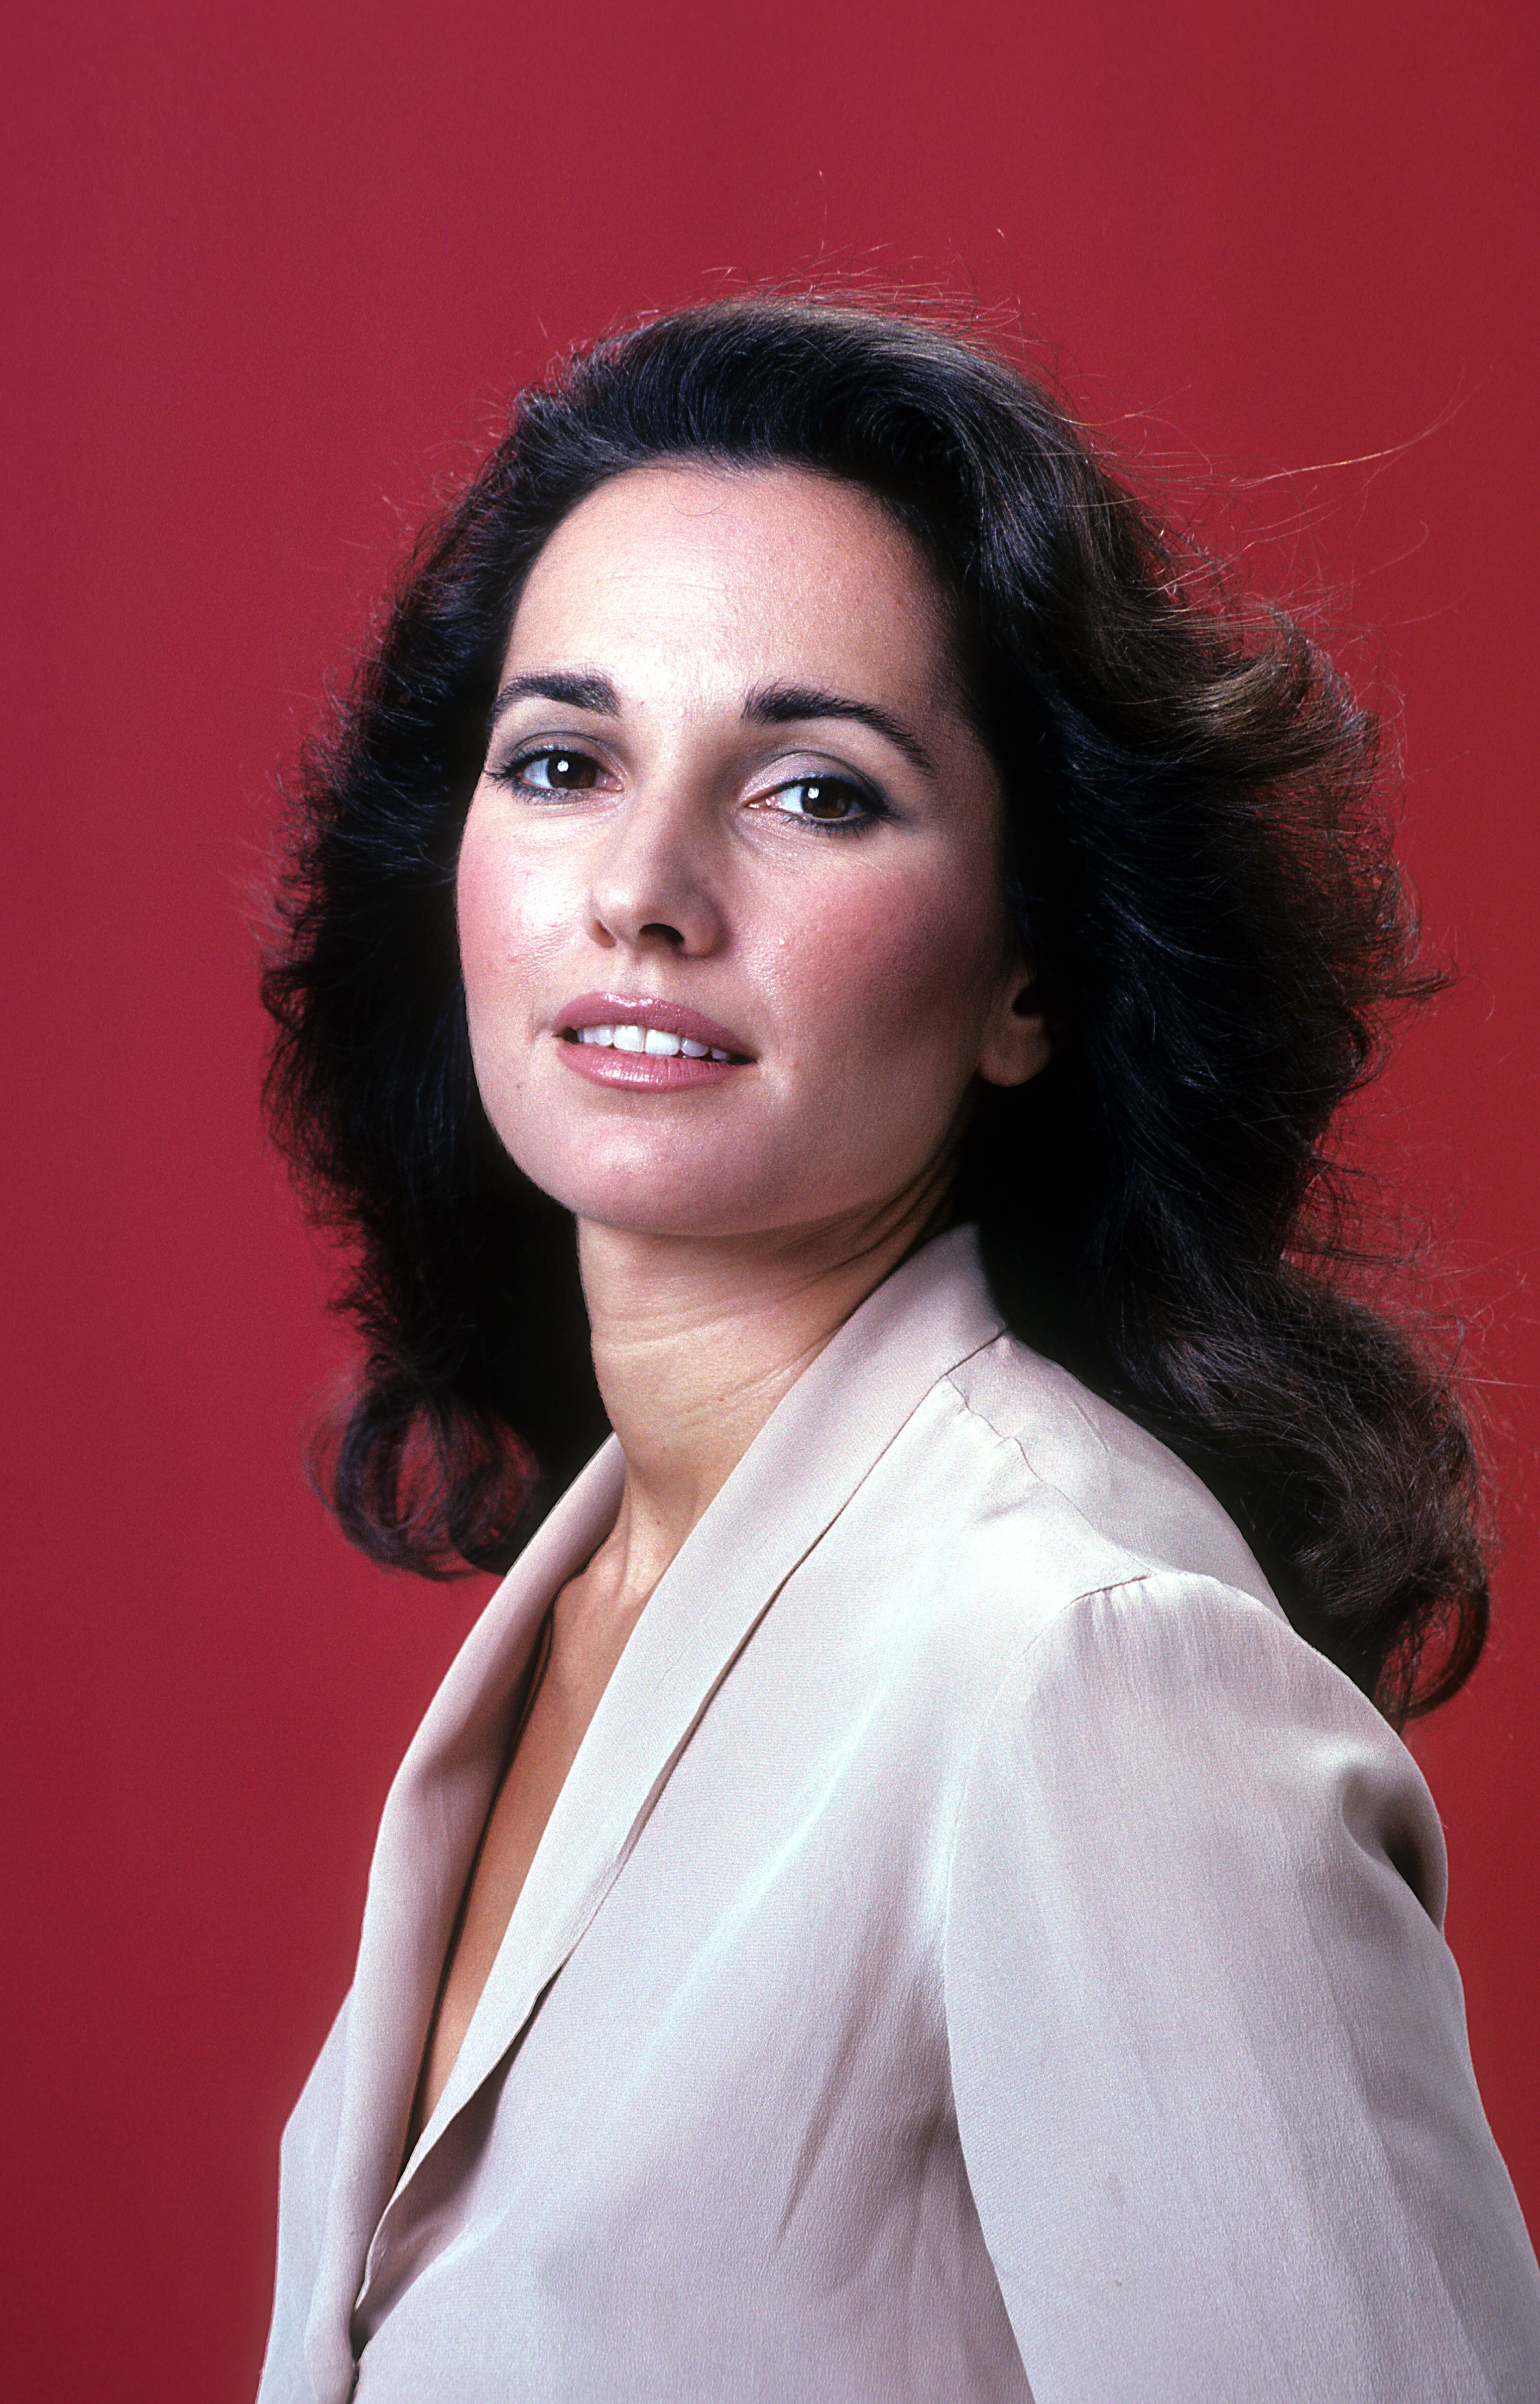 Susan Lucci poses for a portrait in circa 1978. | Source: Getty Images